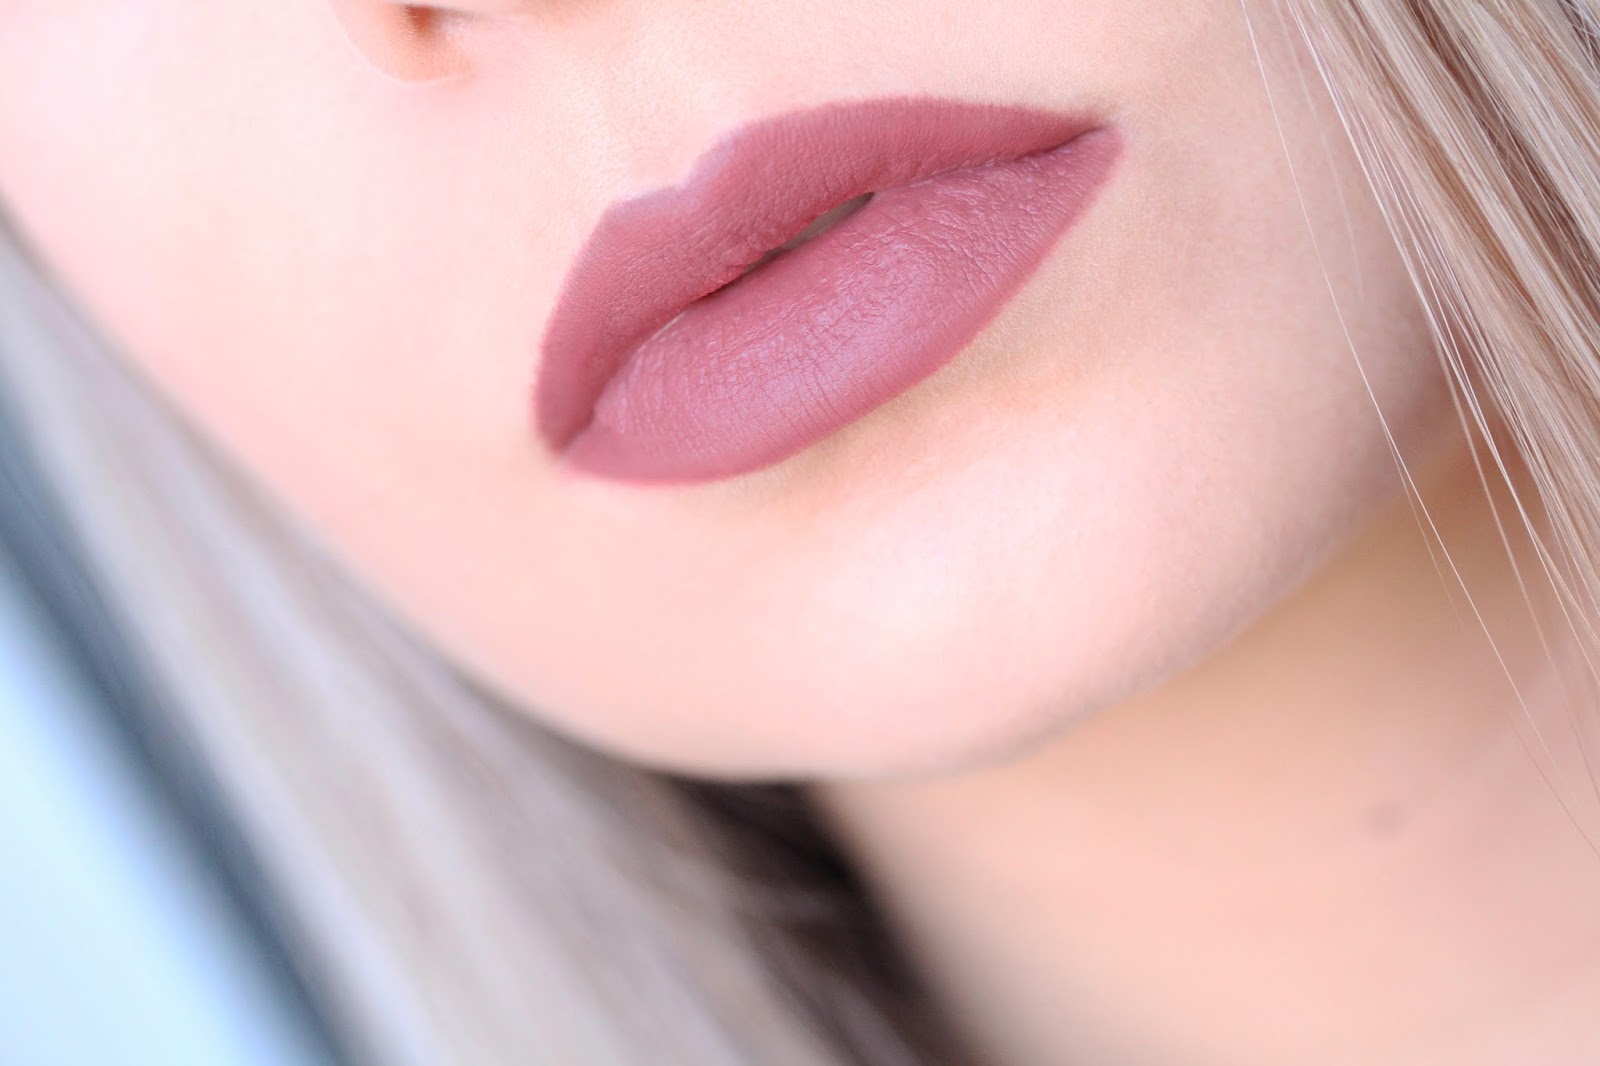 The Kylie Jenner Lip Mac Soar Lip Liner Rosychicc.